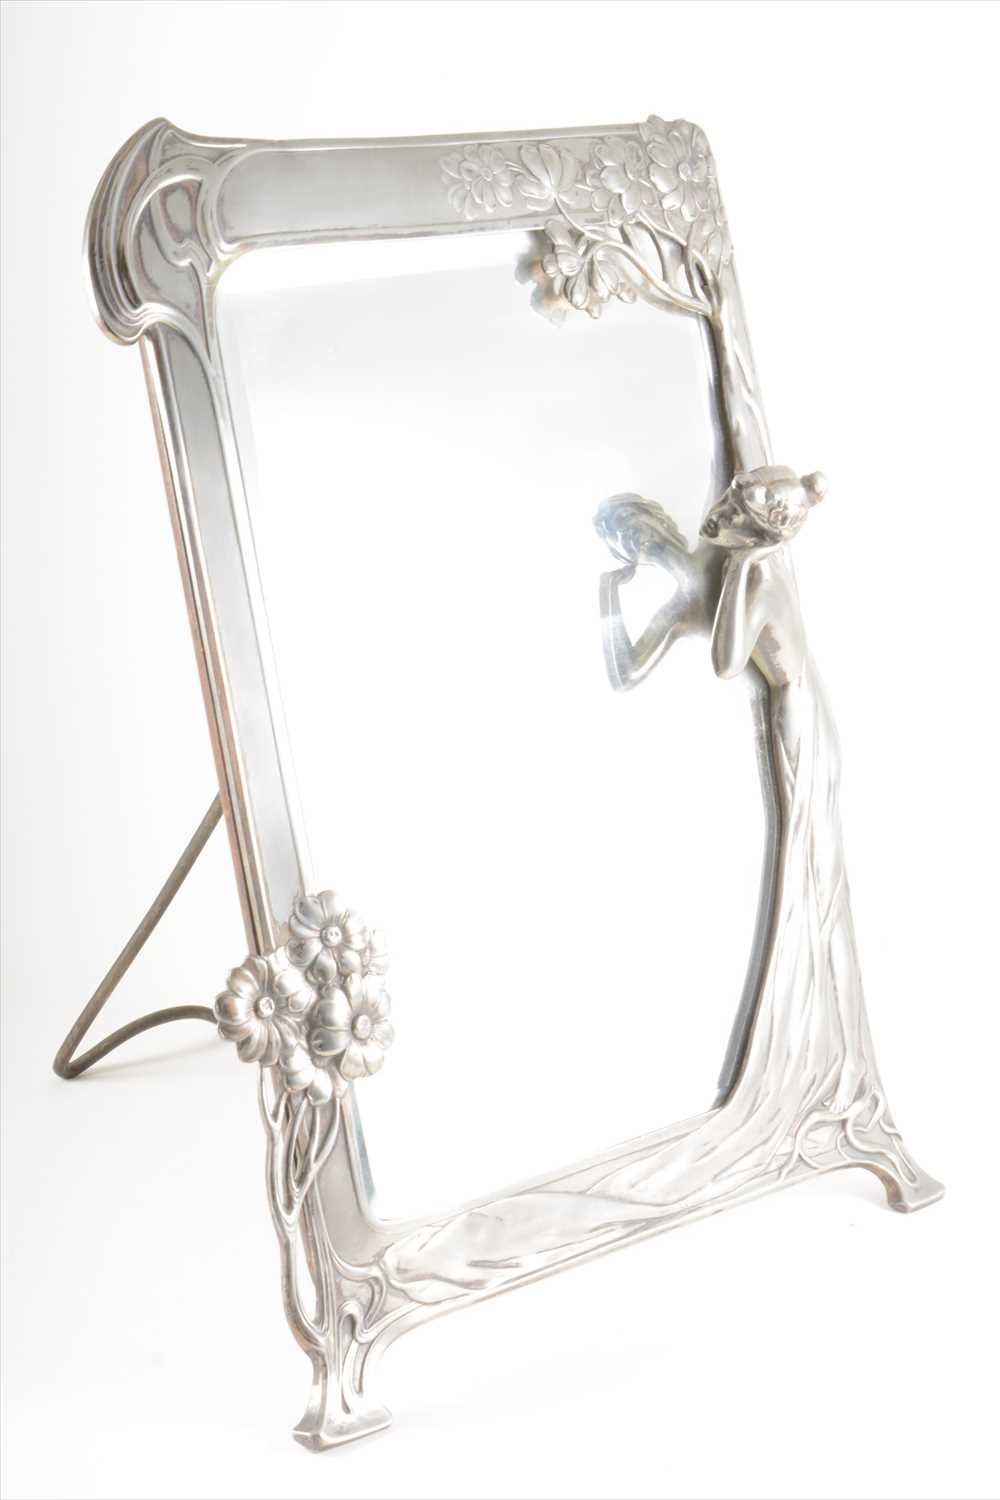 Lot 95 - An Art Nouveau polished pewter figural mirror, by WMF, circa 1905.